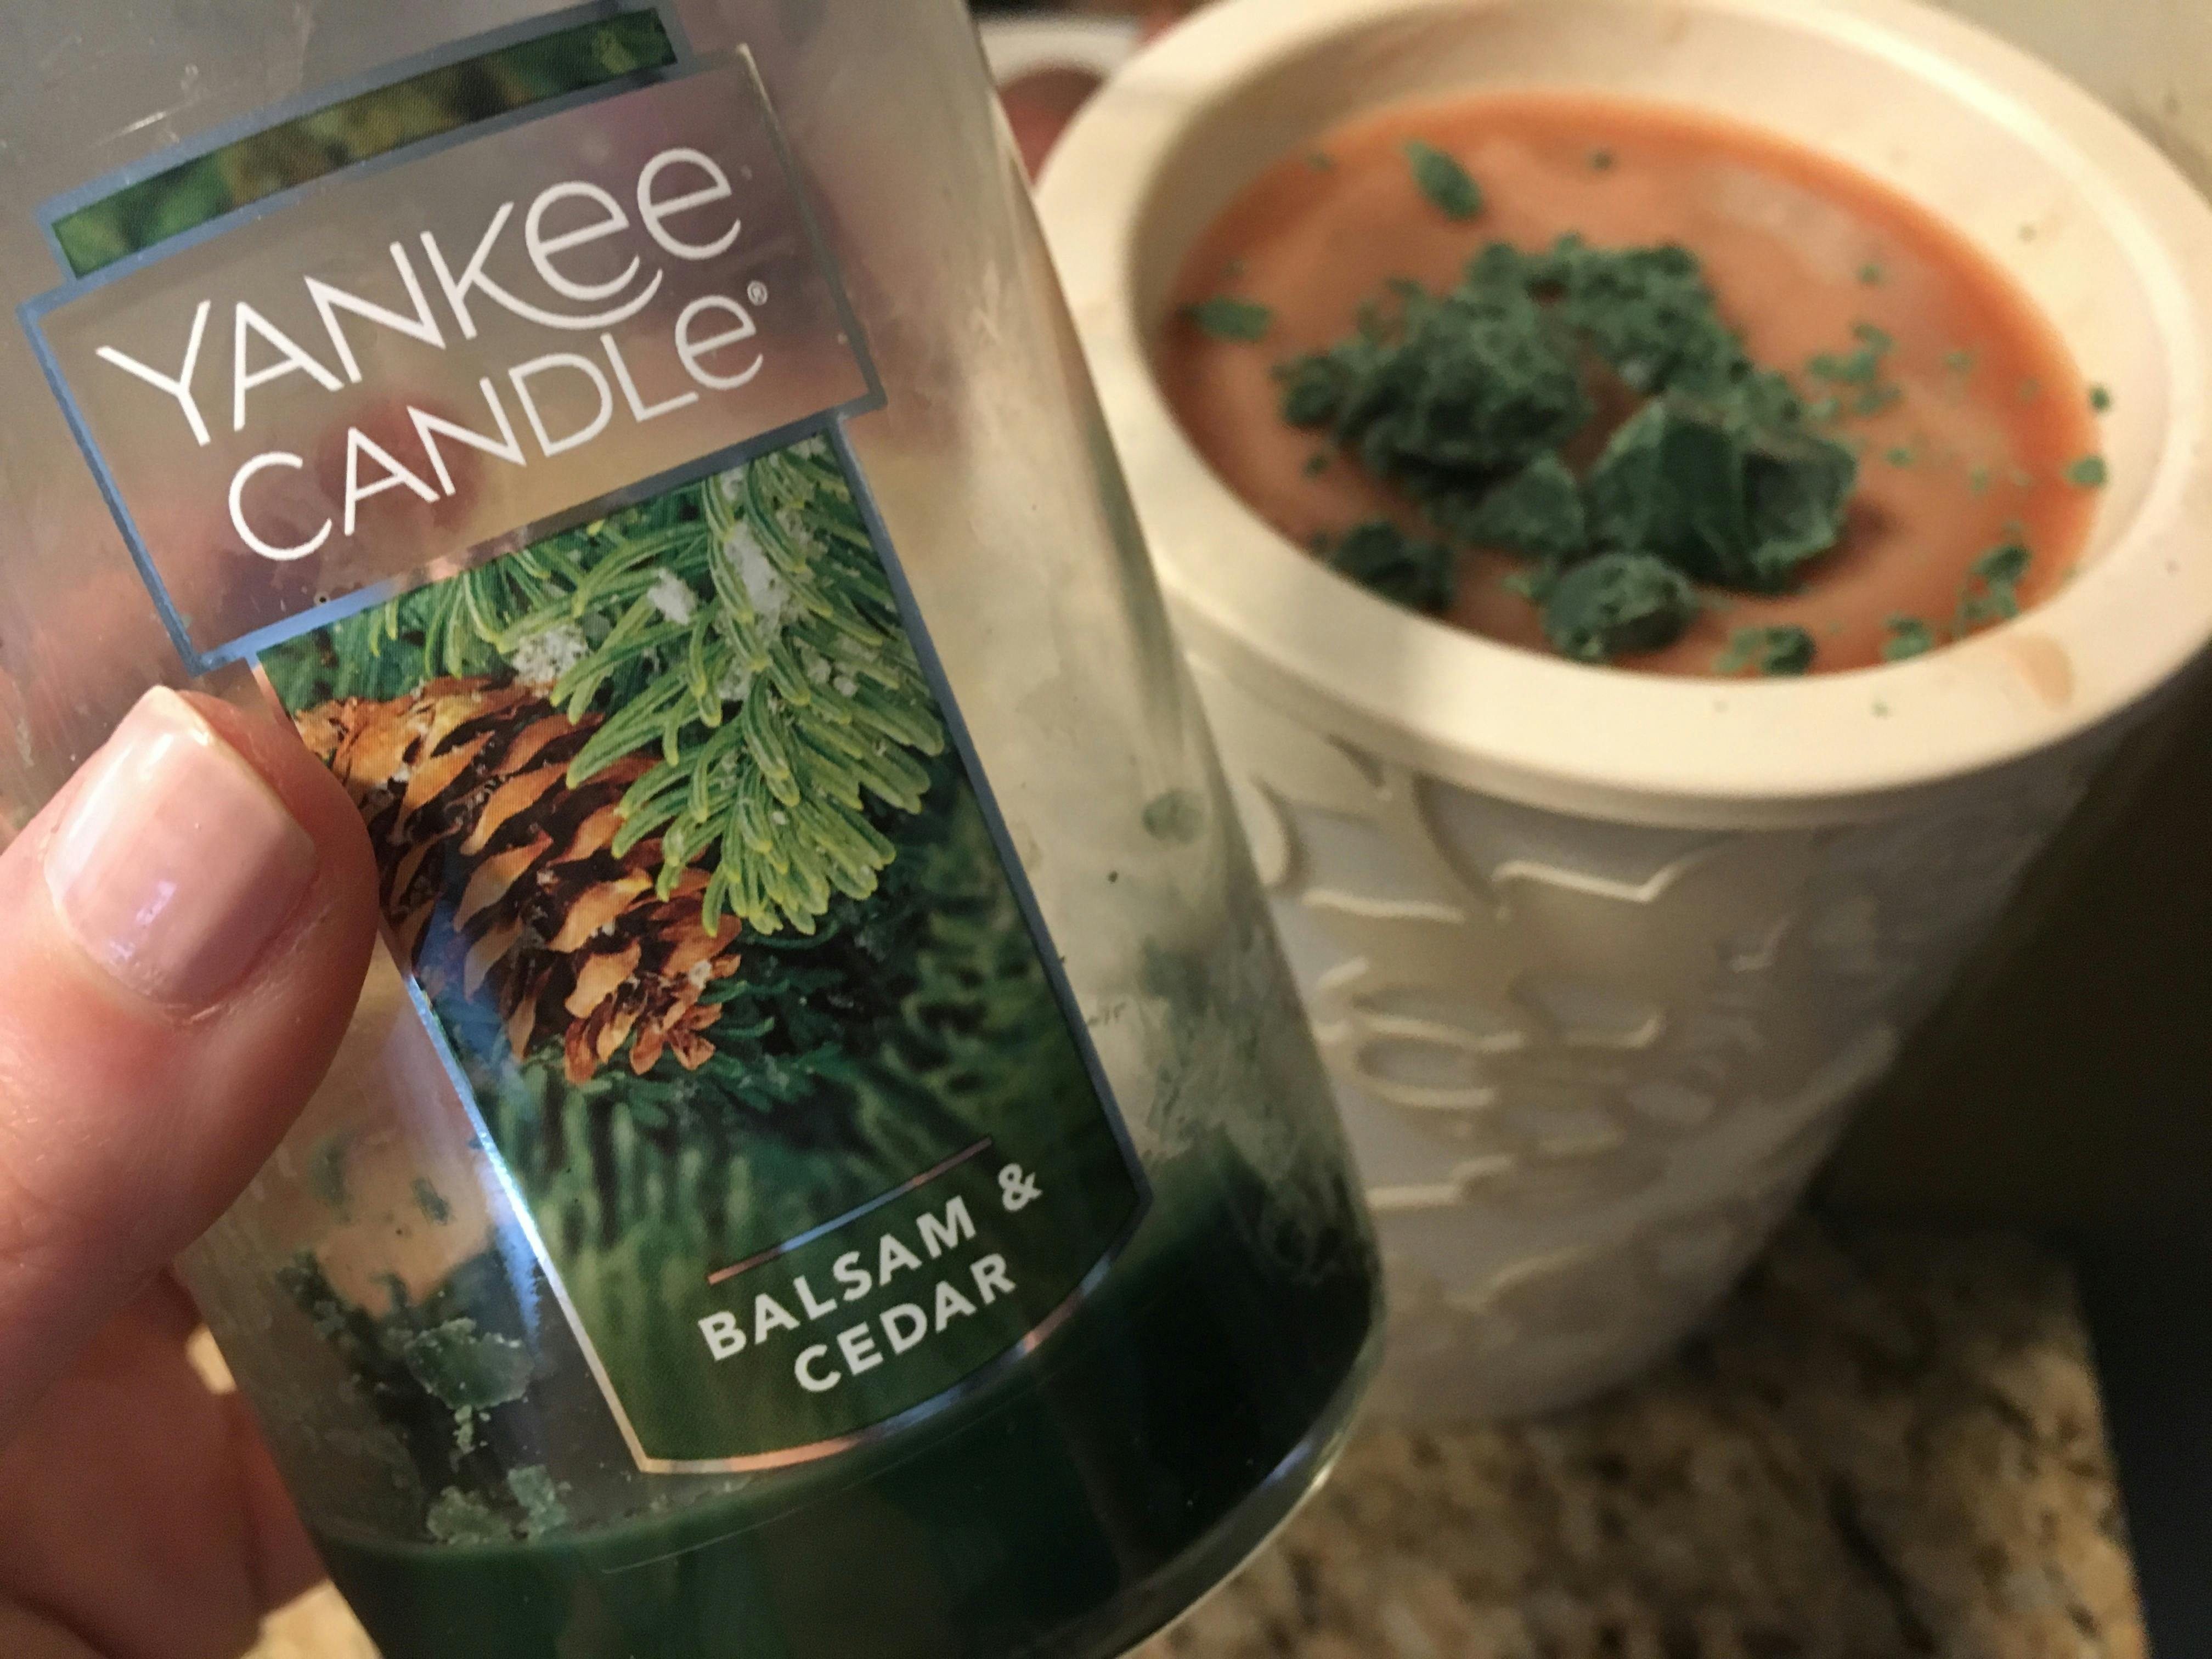 Use leftover candle wax for Yankee Candle melt cups.  Leftover candle wax,  Yankee candle melts, Yankee candle